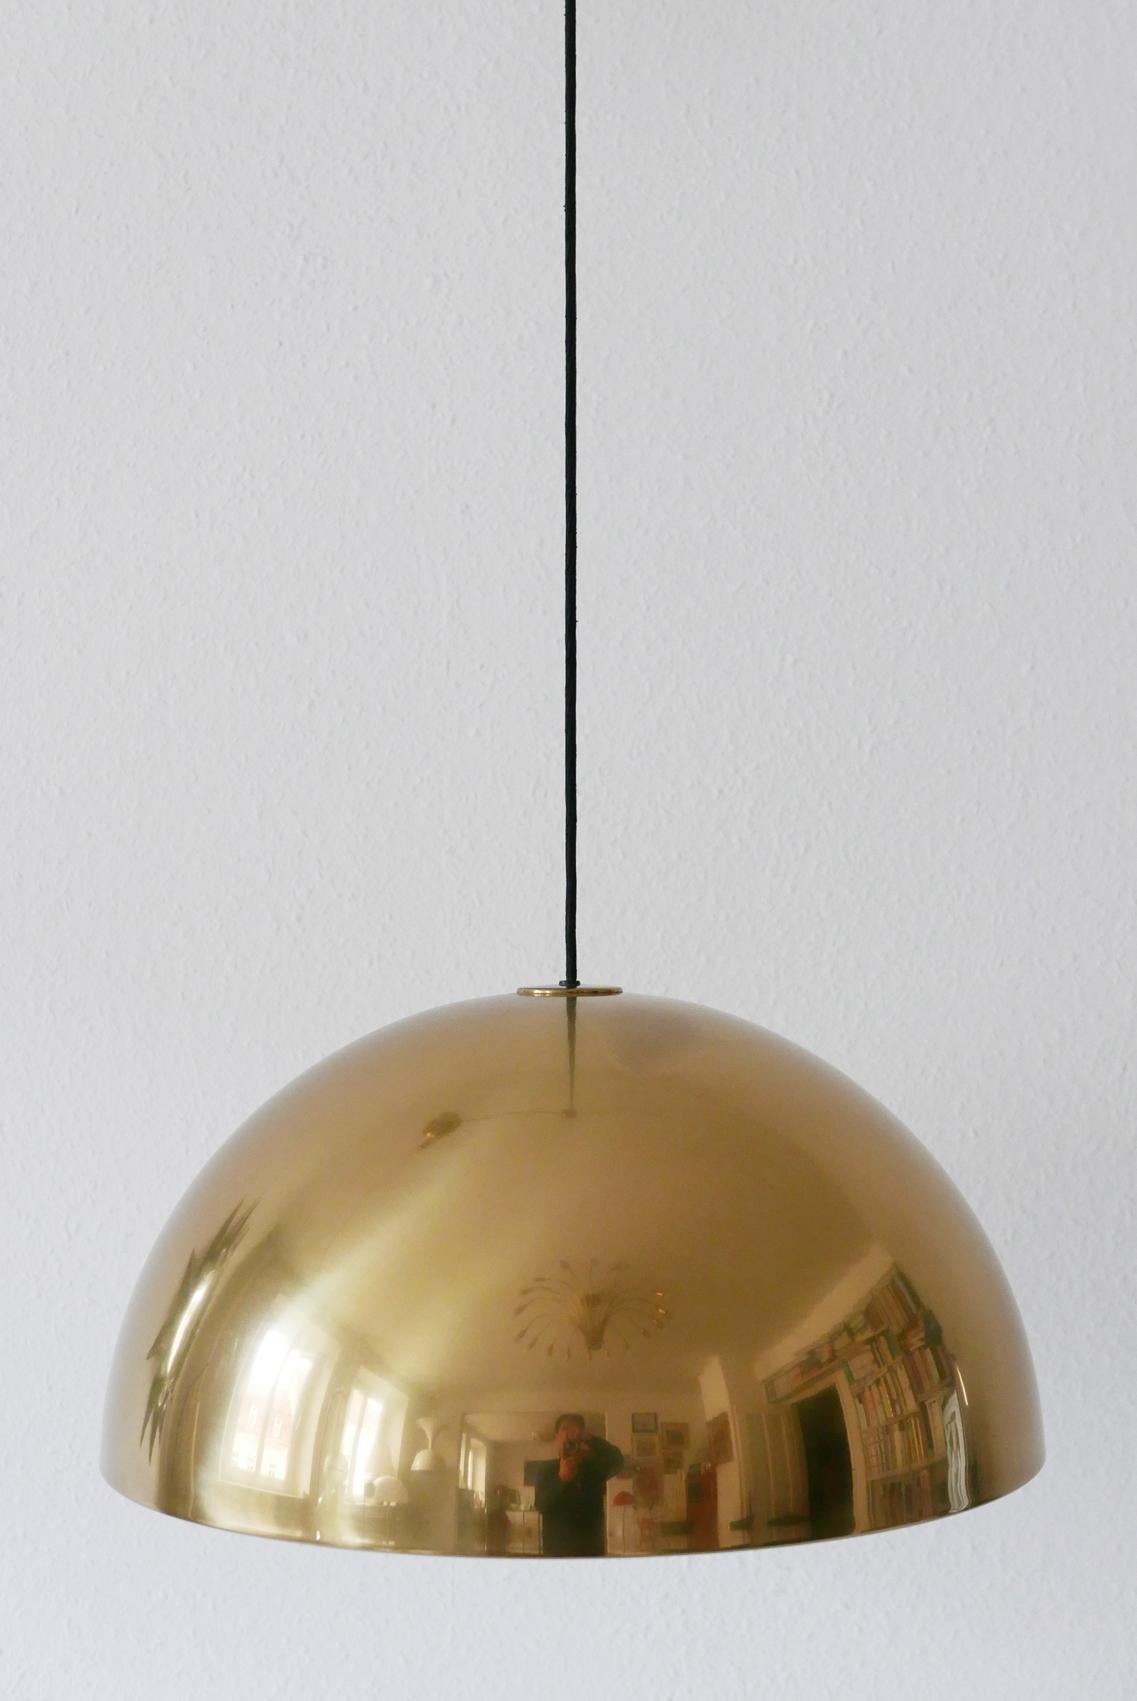 Exceptional Solan Counter Balance Pendant Lamp by Florian Schulz, 1980s, Germany For Sale 7